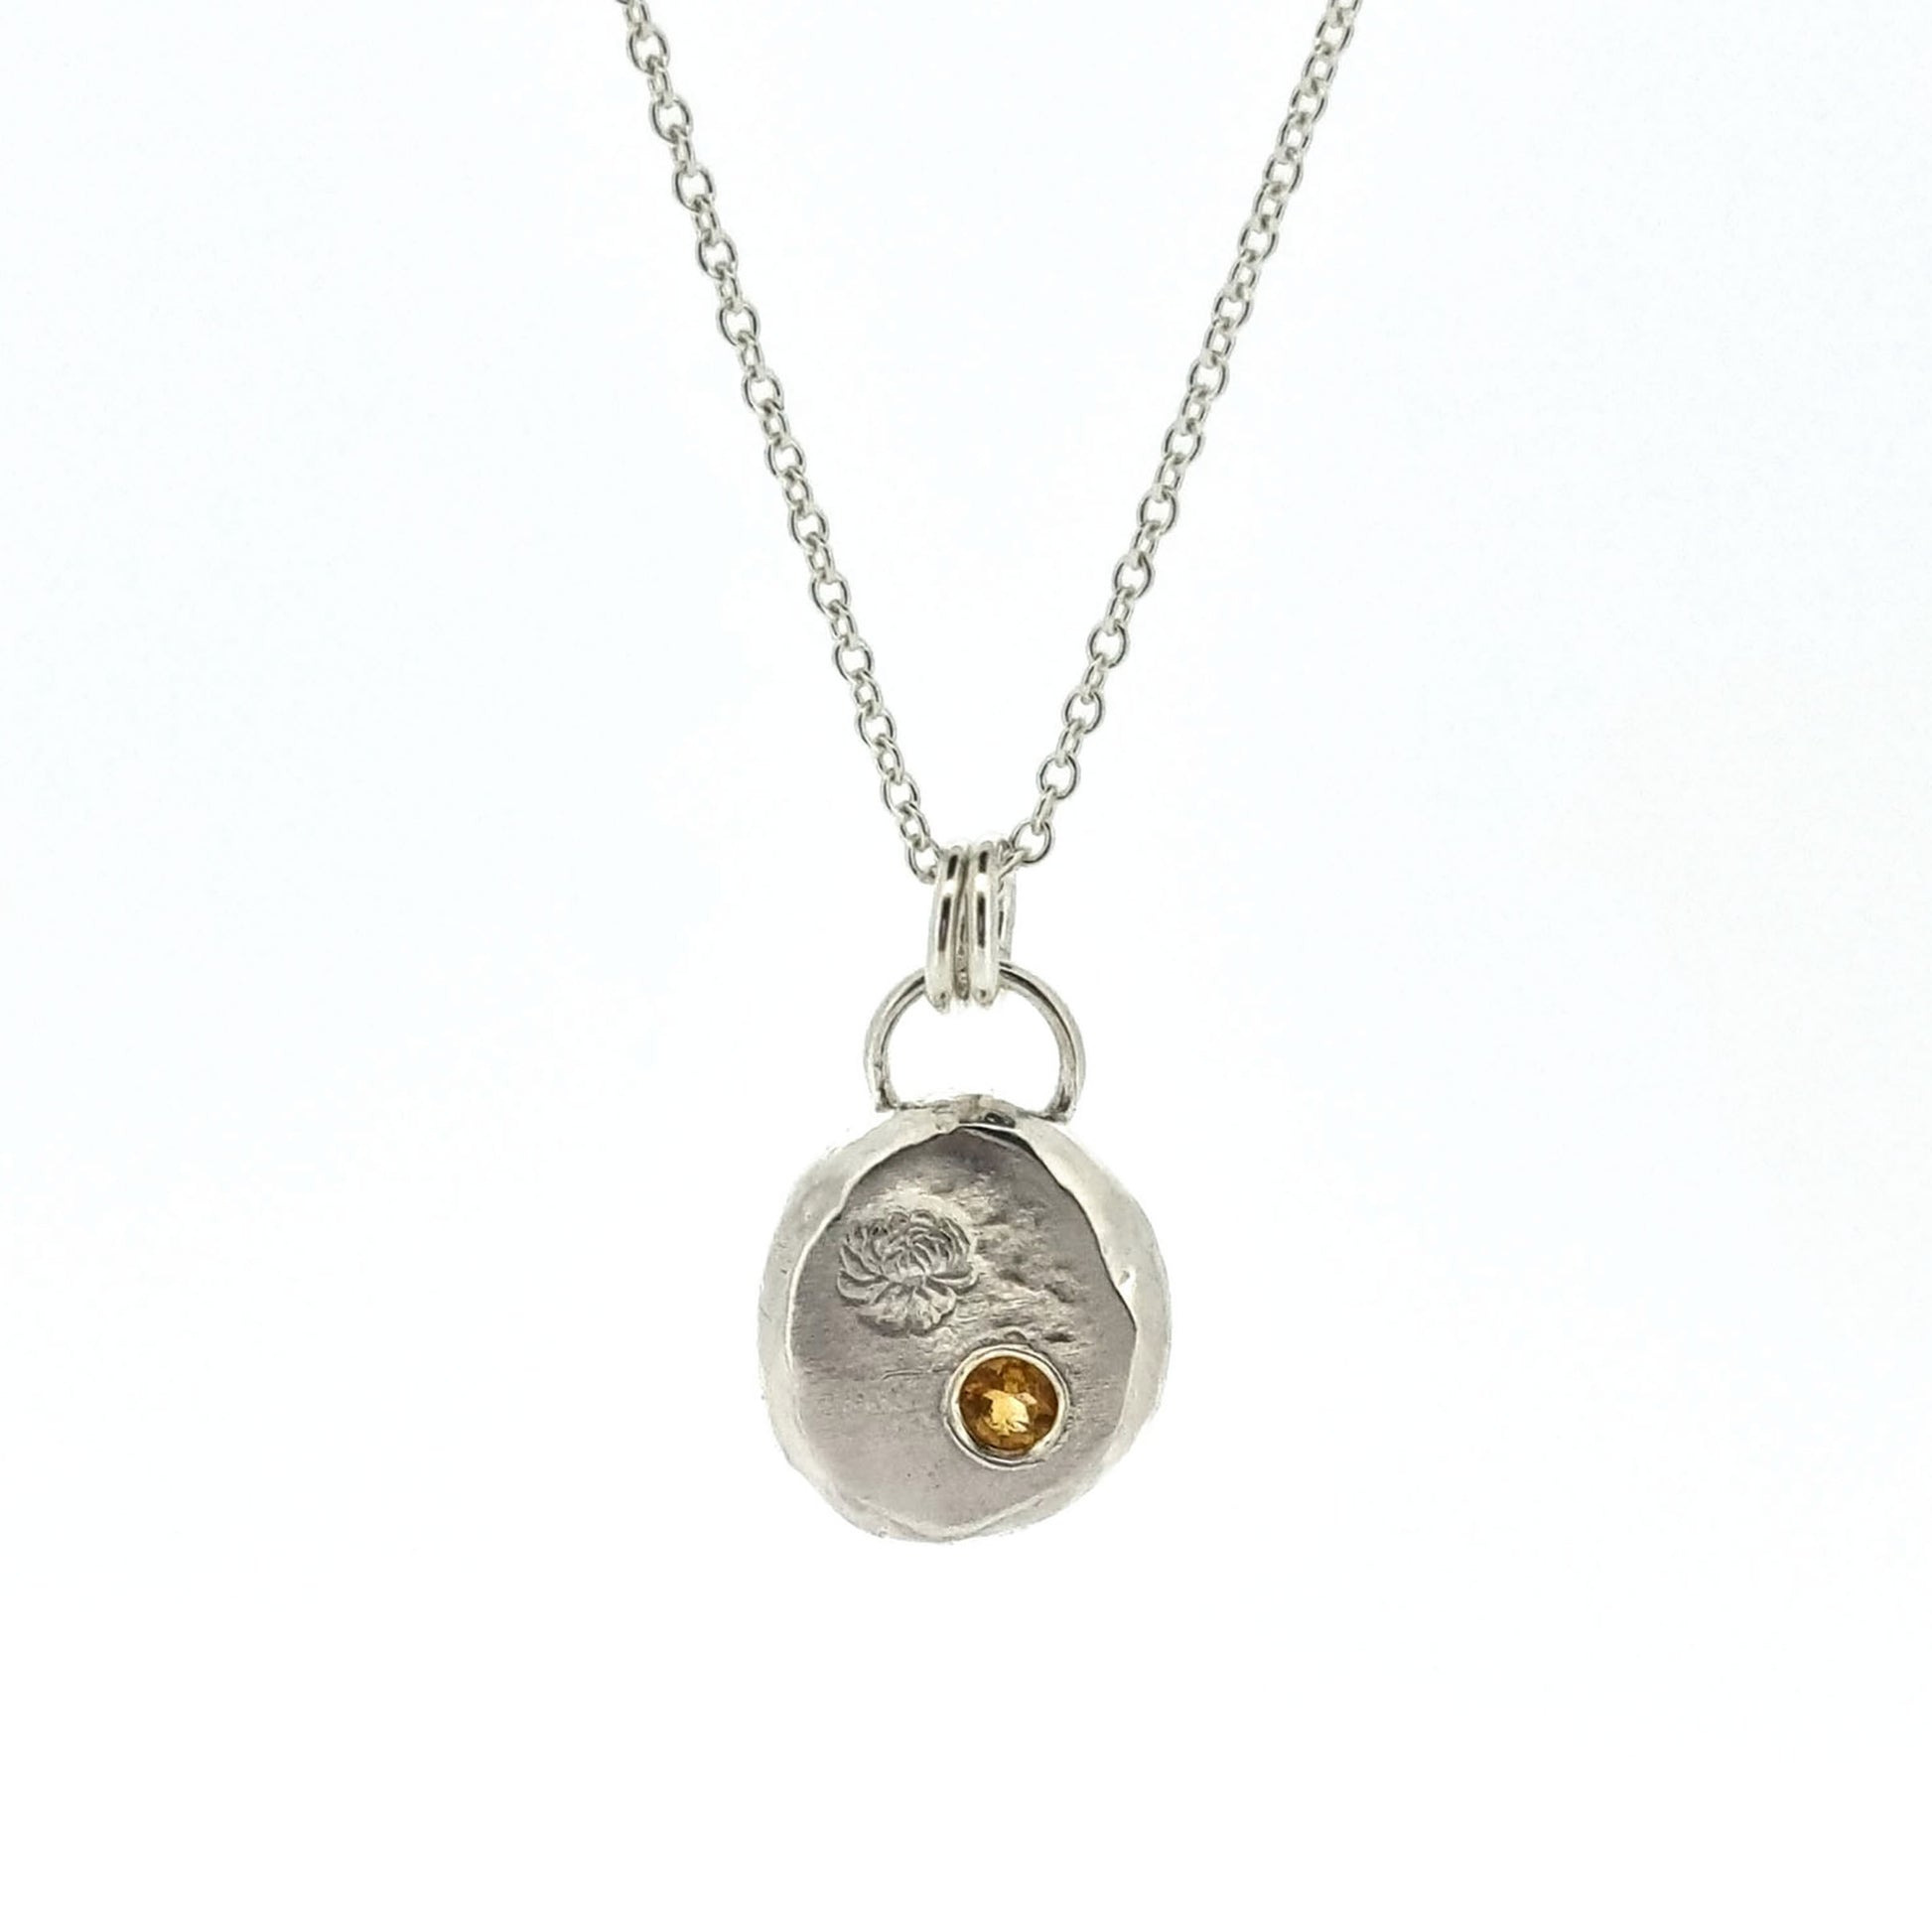 Round silver flat pebble pendant with chrysanthemum flower engraved on it and a flush set yellow citrine gemstone. On a silver chain.